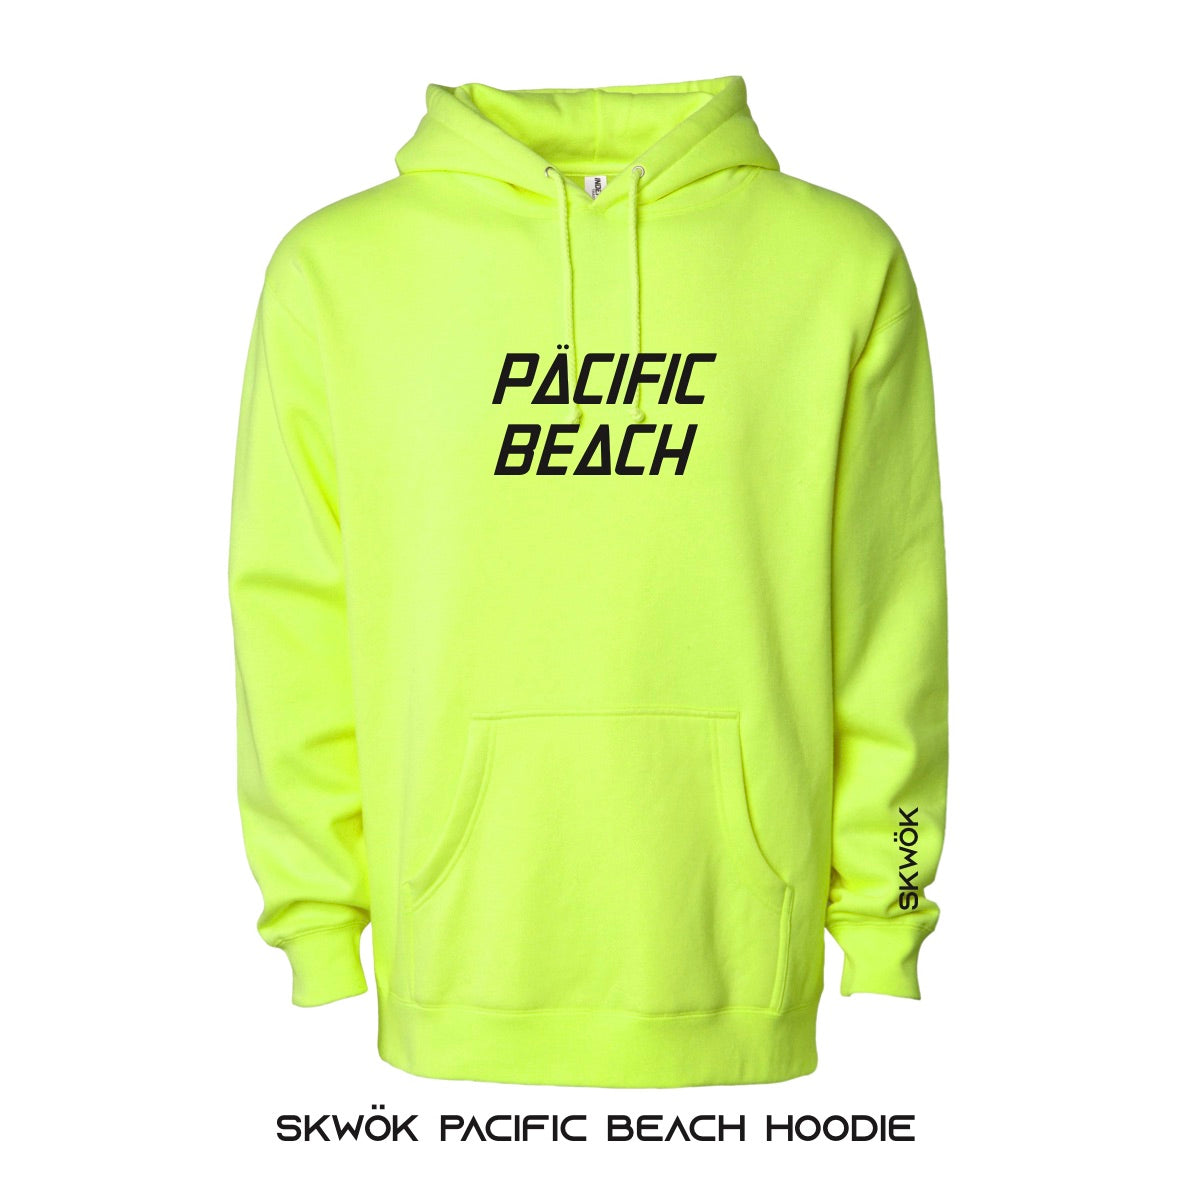 Skwok Pacific Beach Hoodie - 10oz - Safety Yellow NEON